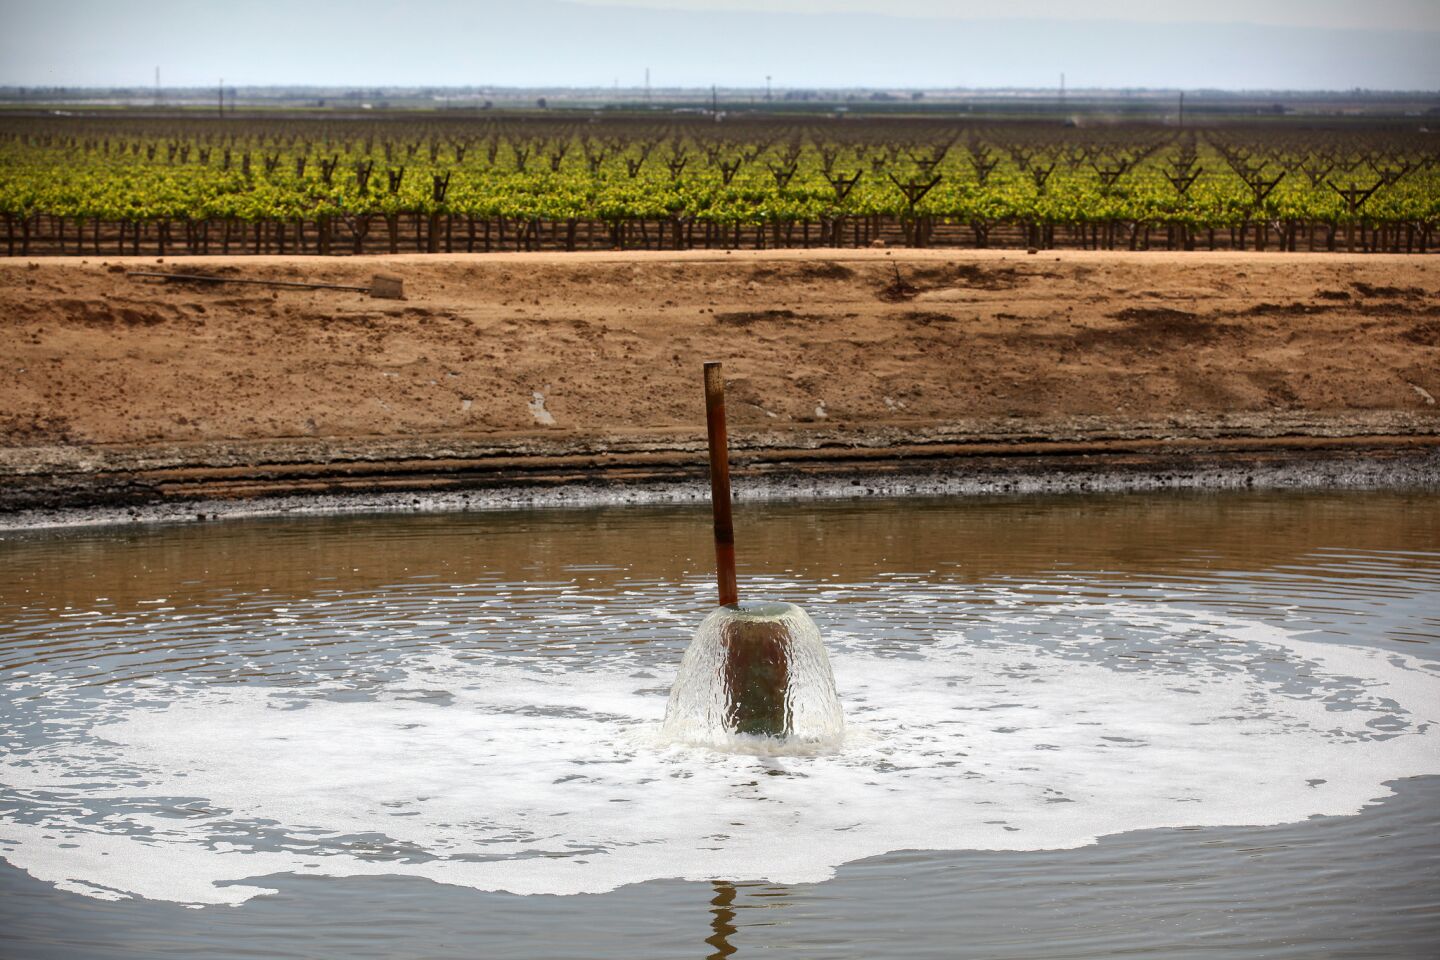 Water flows into a holding pond at a Kern County vineyard near Bakersfield. Water in the reservoir was tested last summer by Scott Smith, chief scientist at Water Defense.